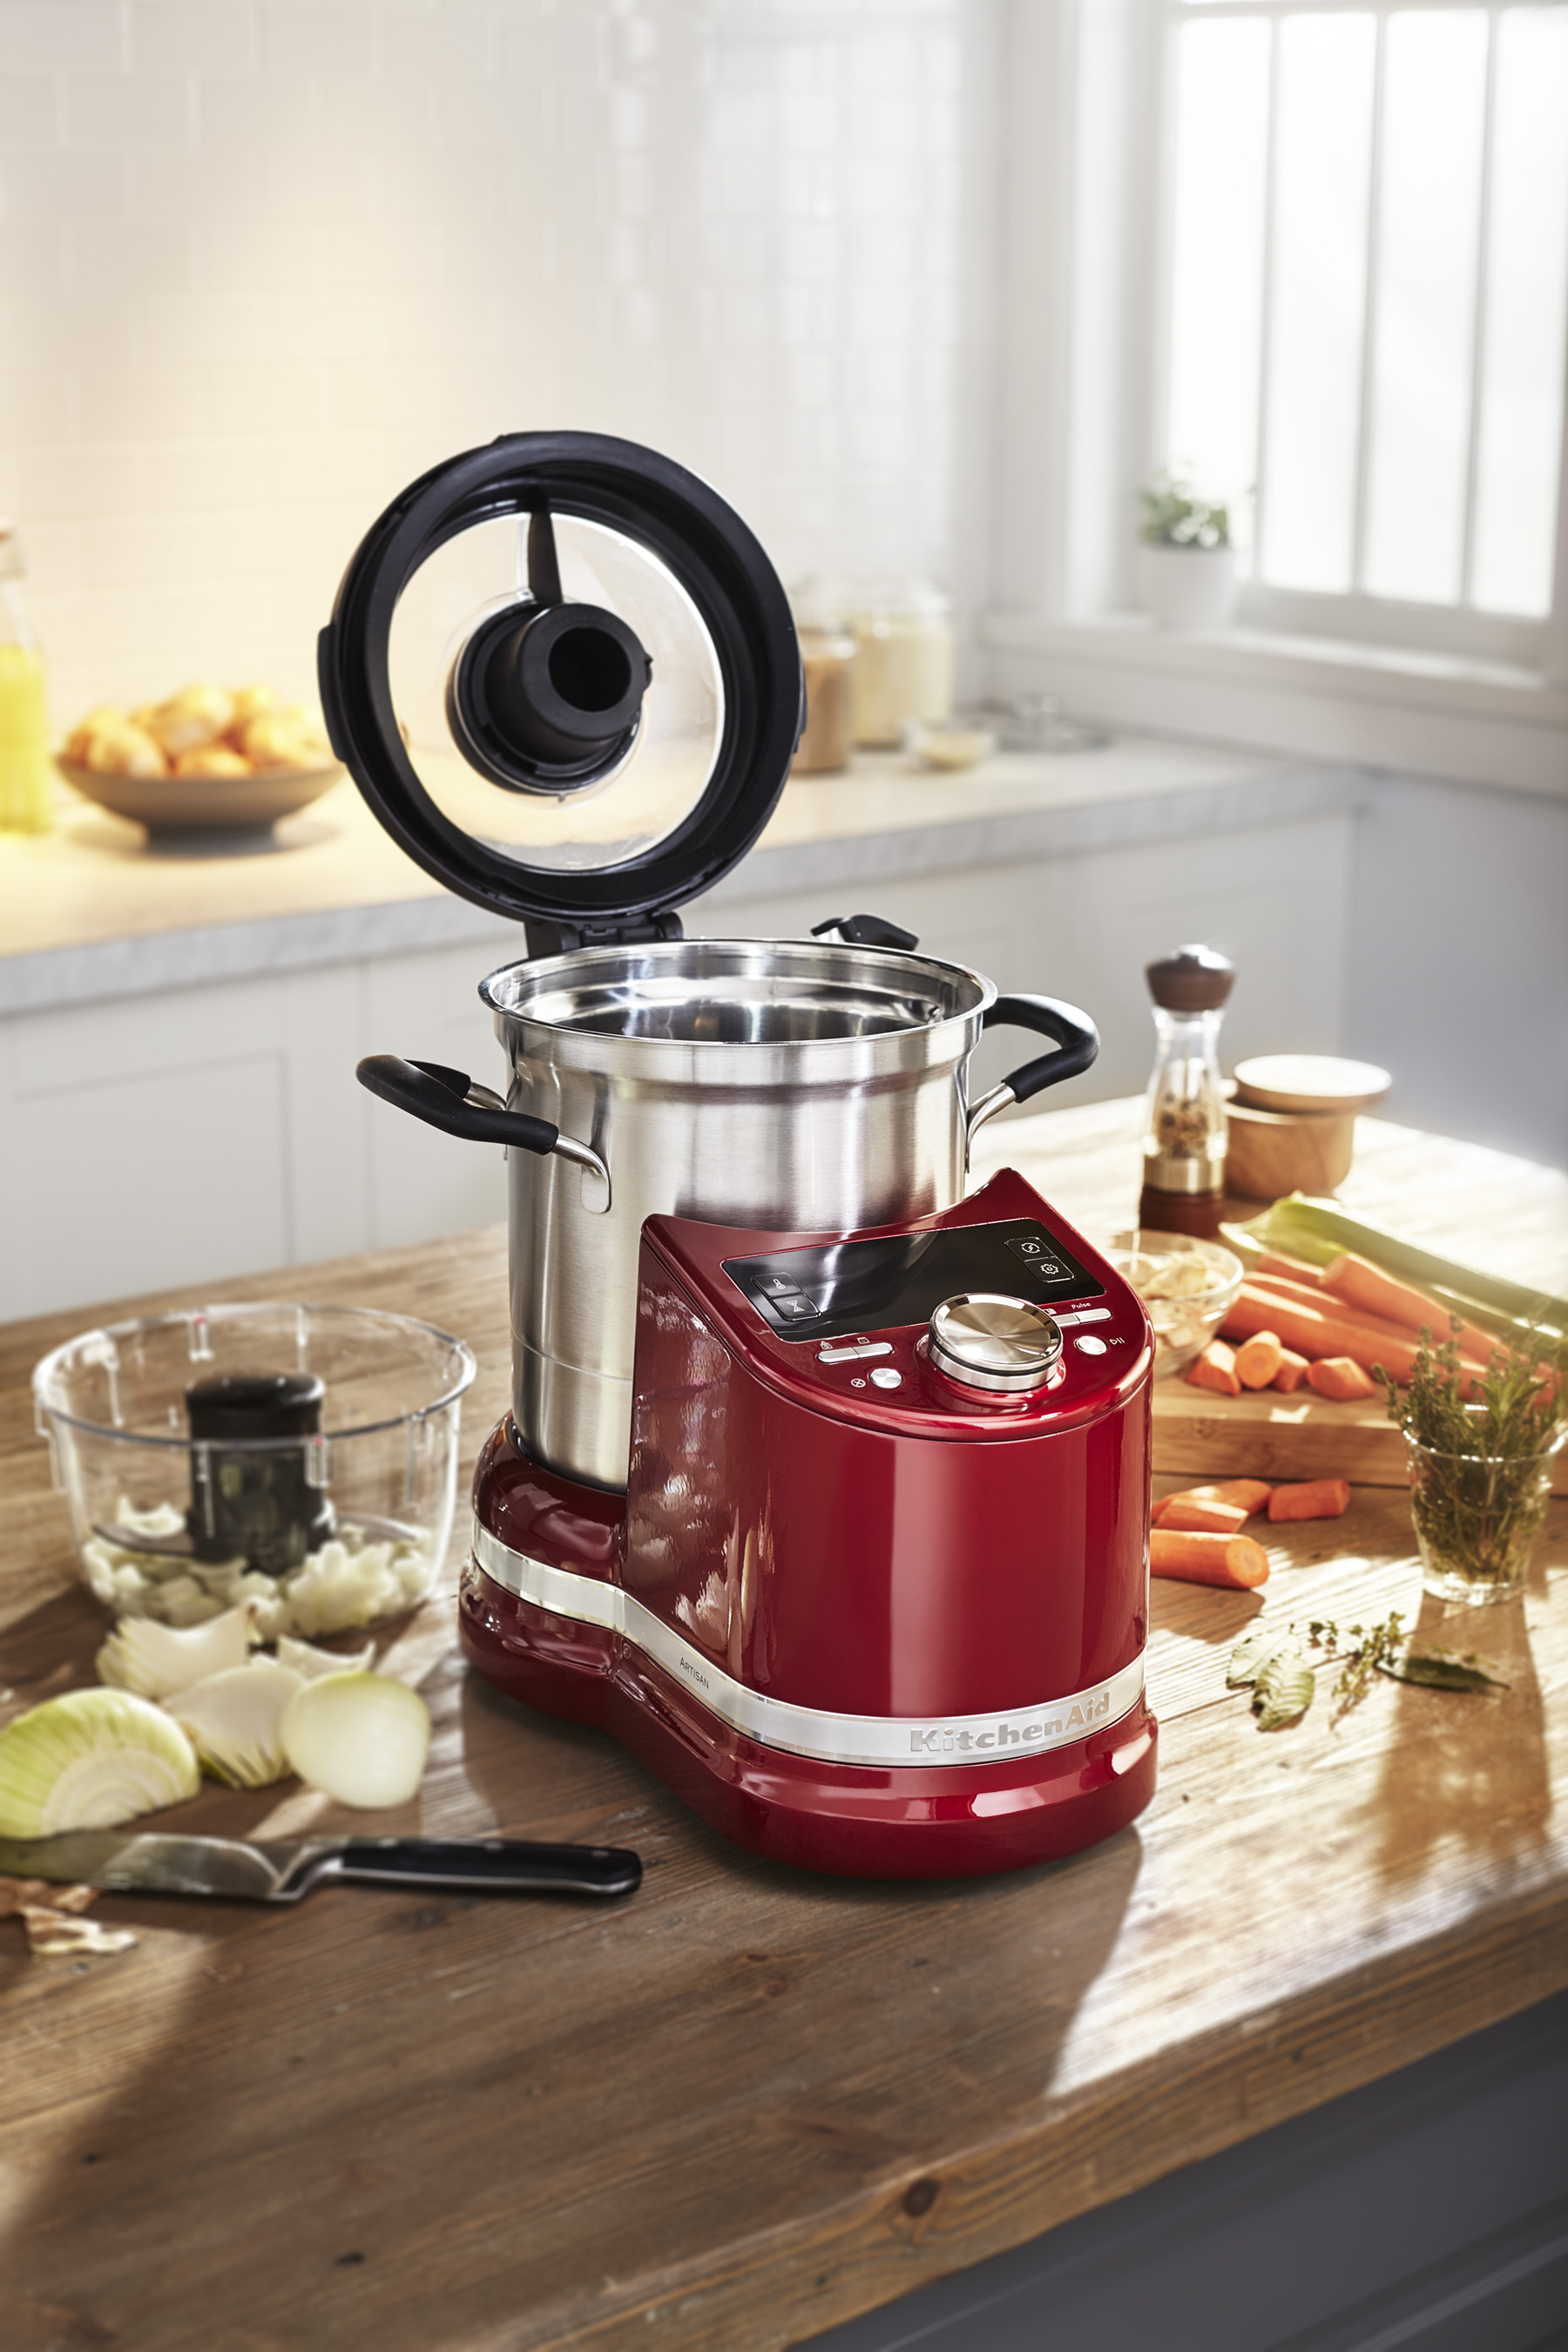 The KitchenAid® Cook Processor Connect is an all-in-one small appliance with an assortment of features to help home cooks create great-tasting, homemade meals.